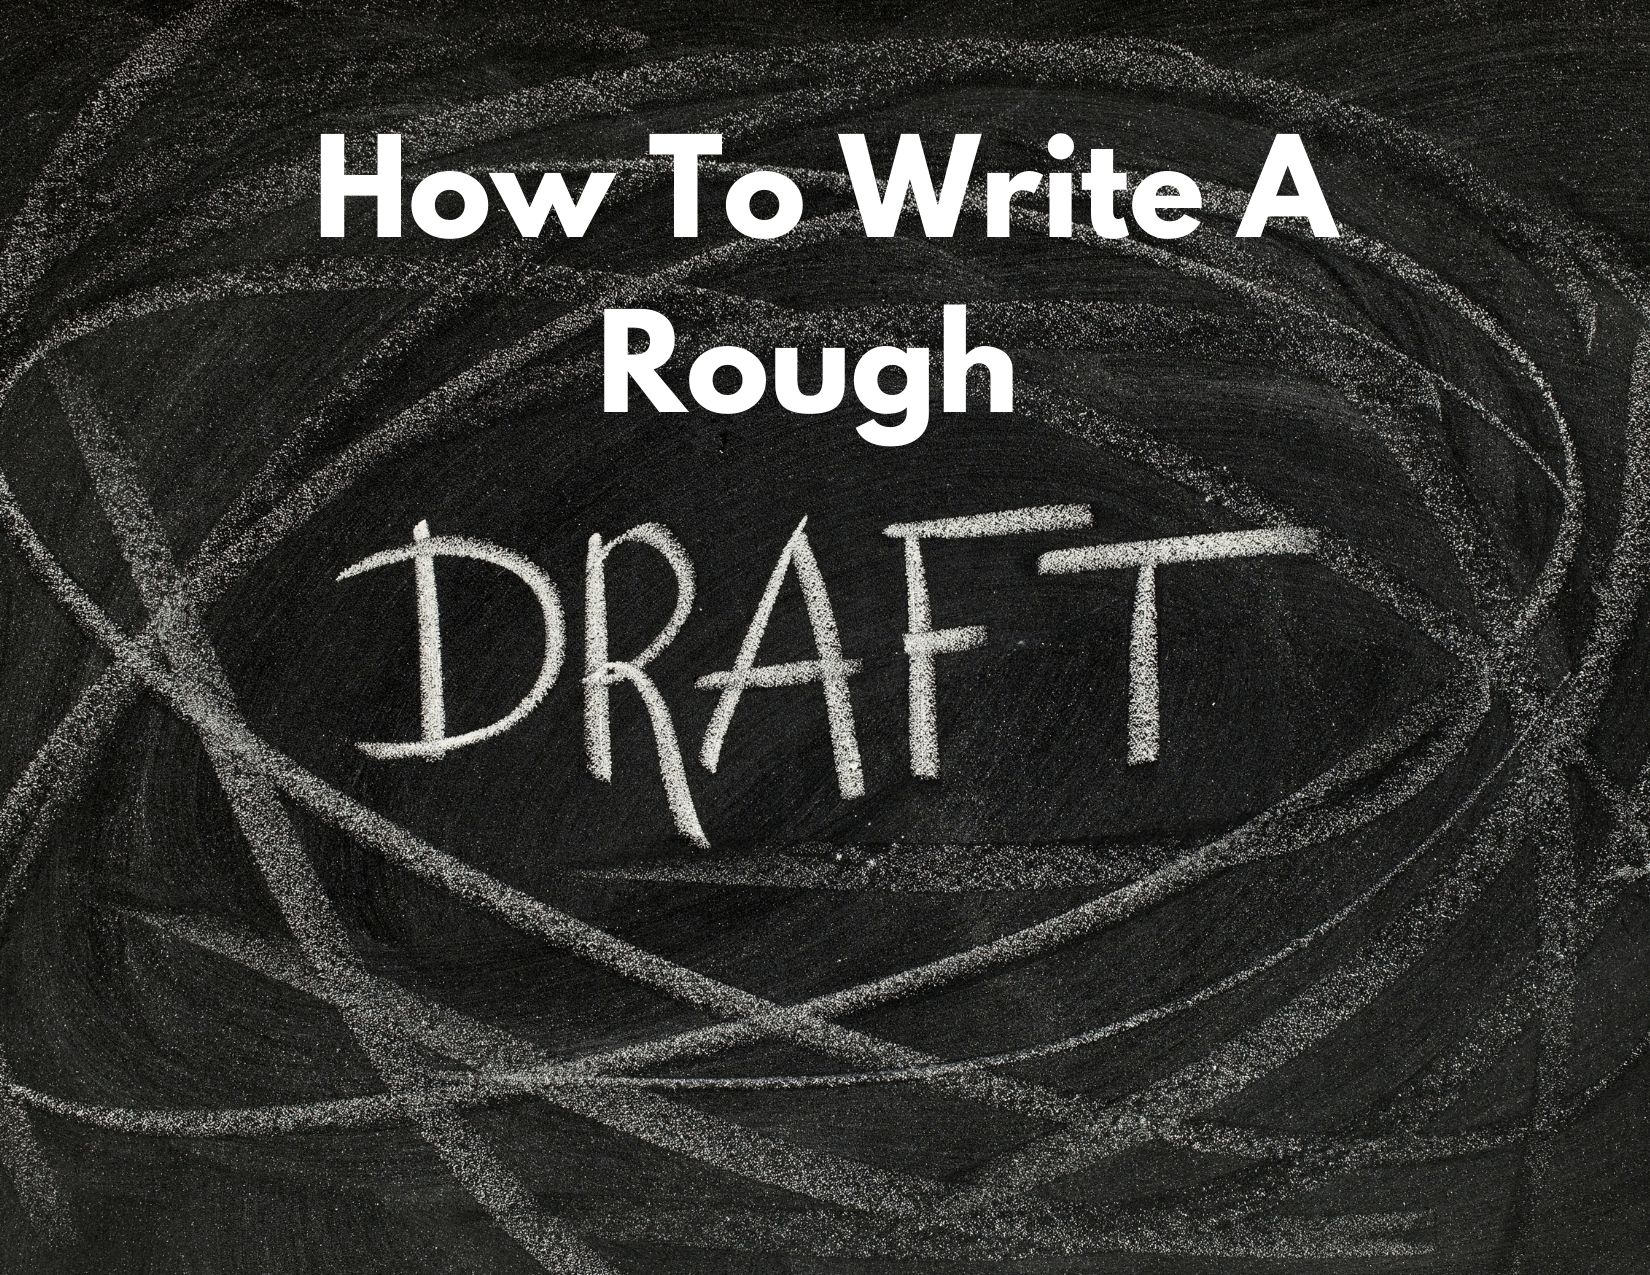 "How To Write a Rough Draft" written on a chalk board